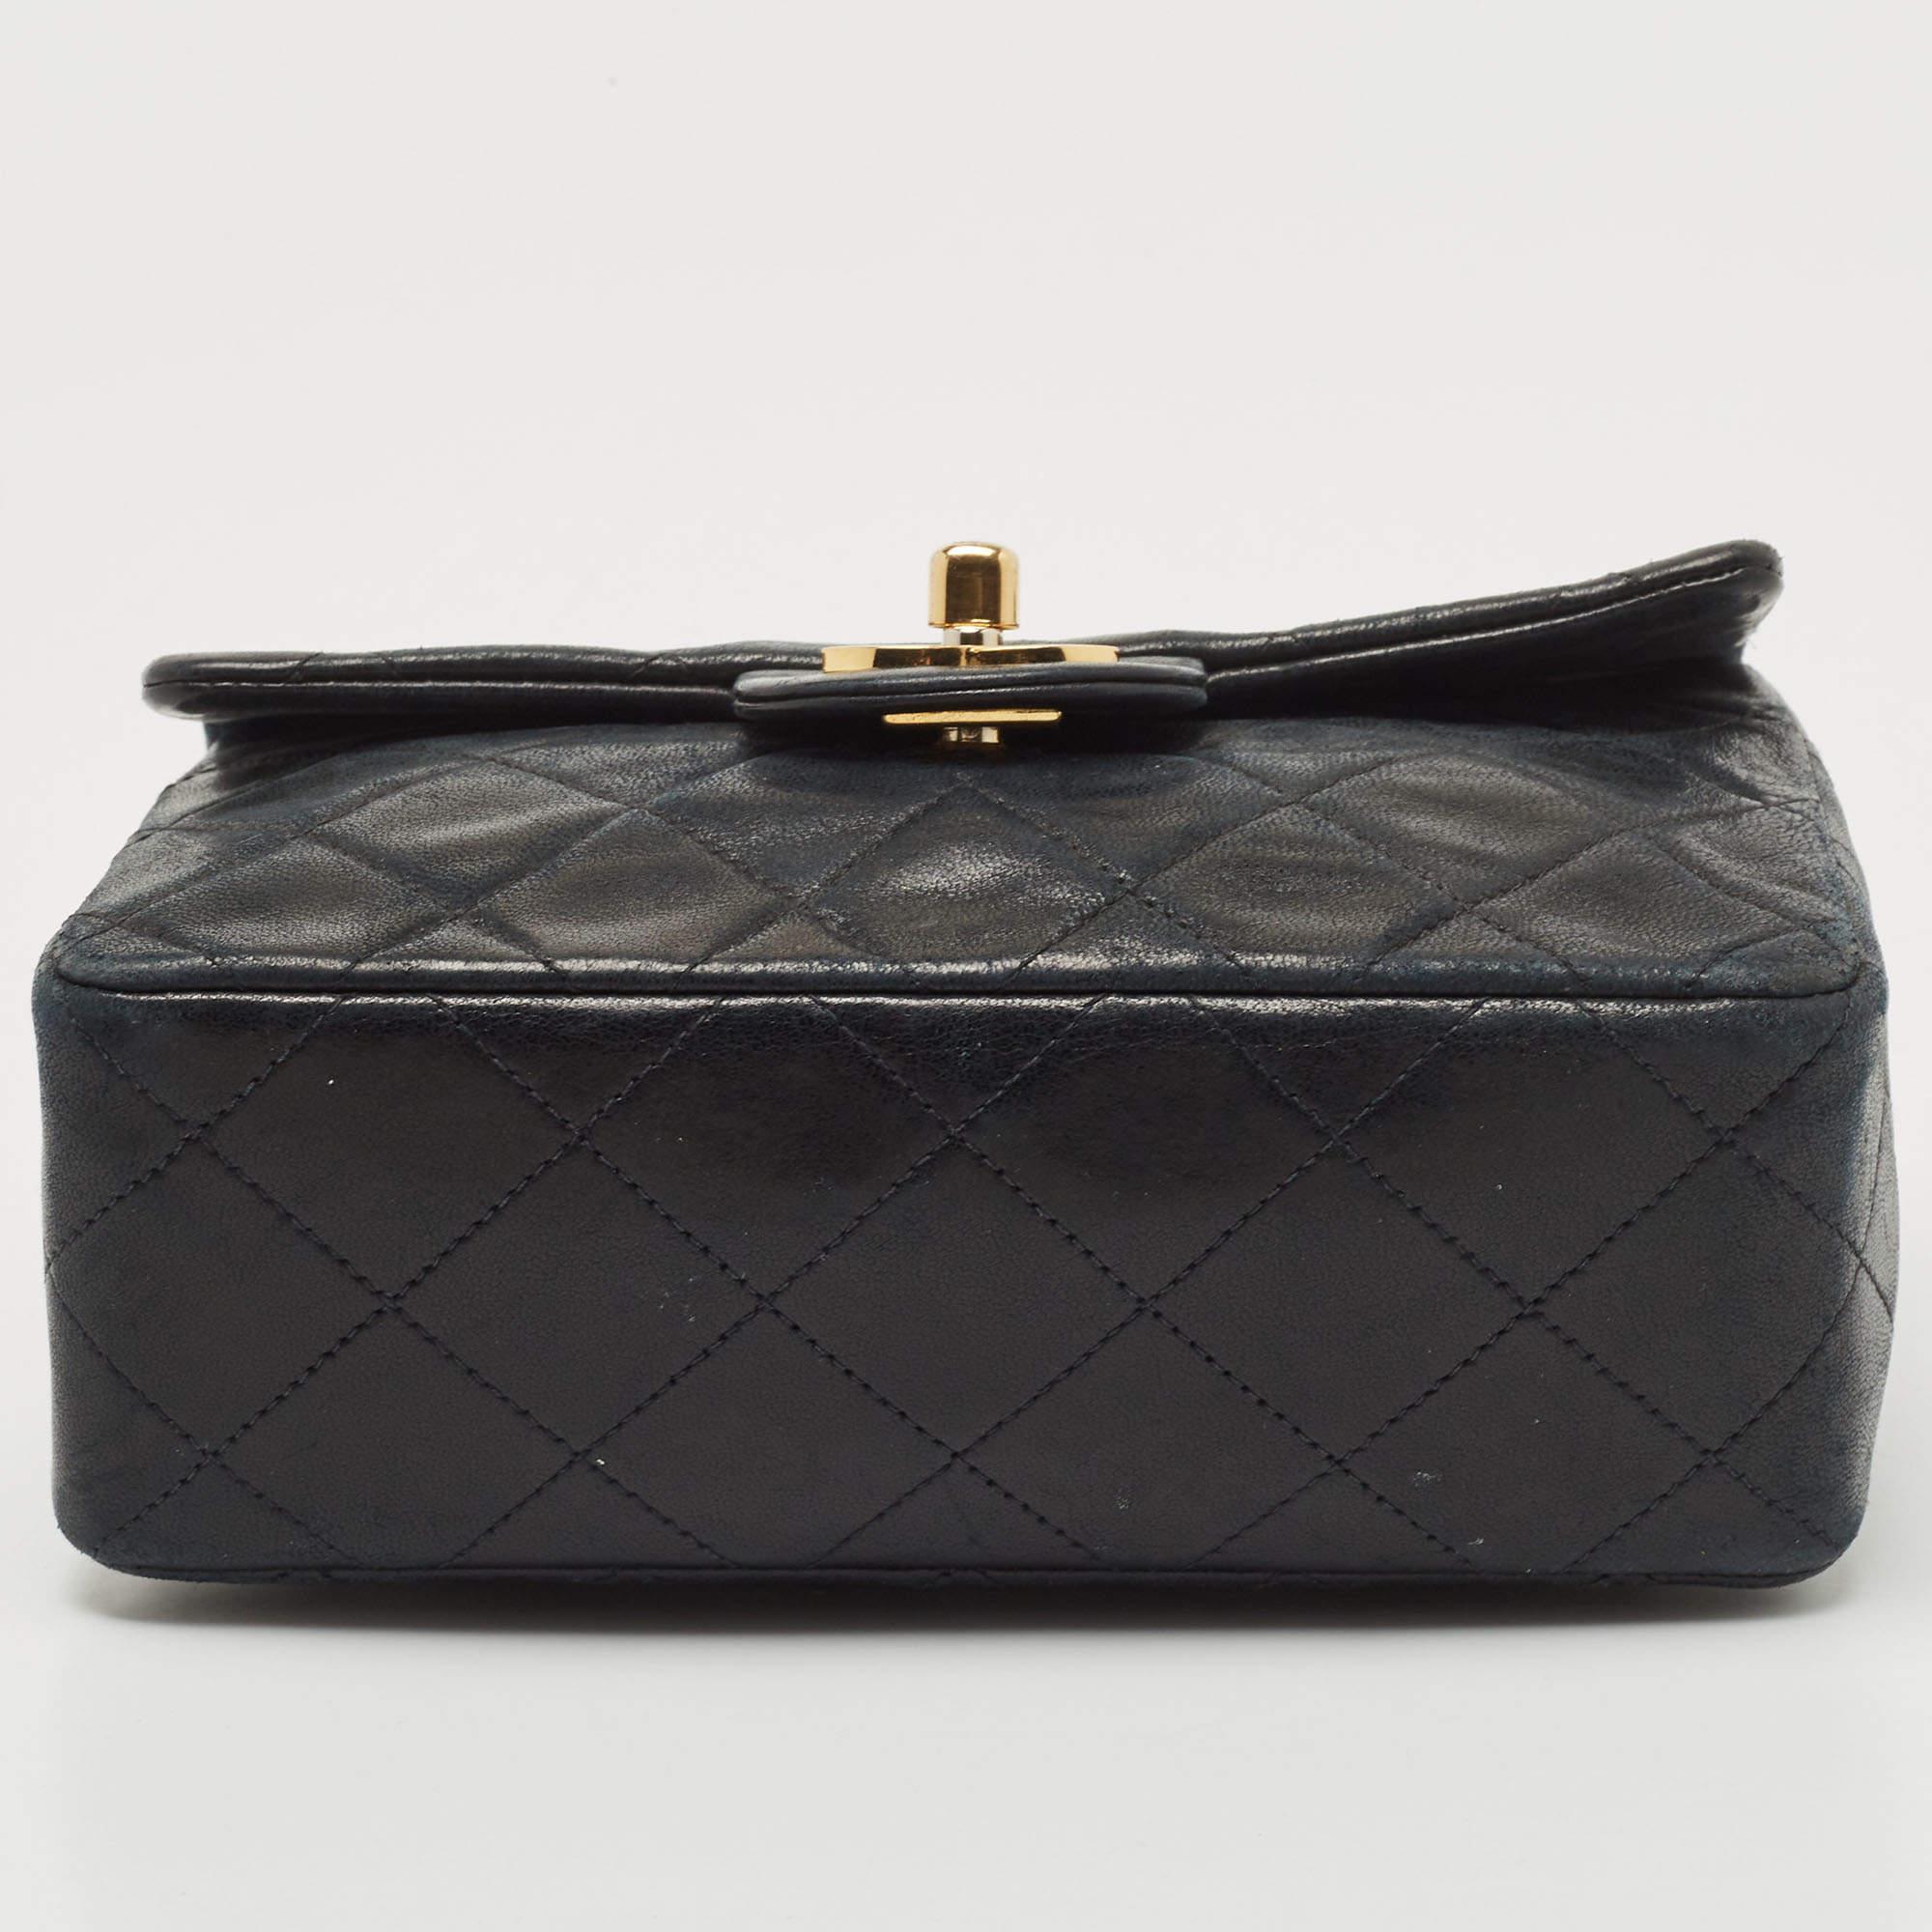 Women's Chanel Black Quilted Leather Vintage Square Classic Flap Bag